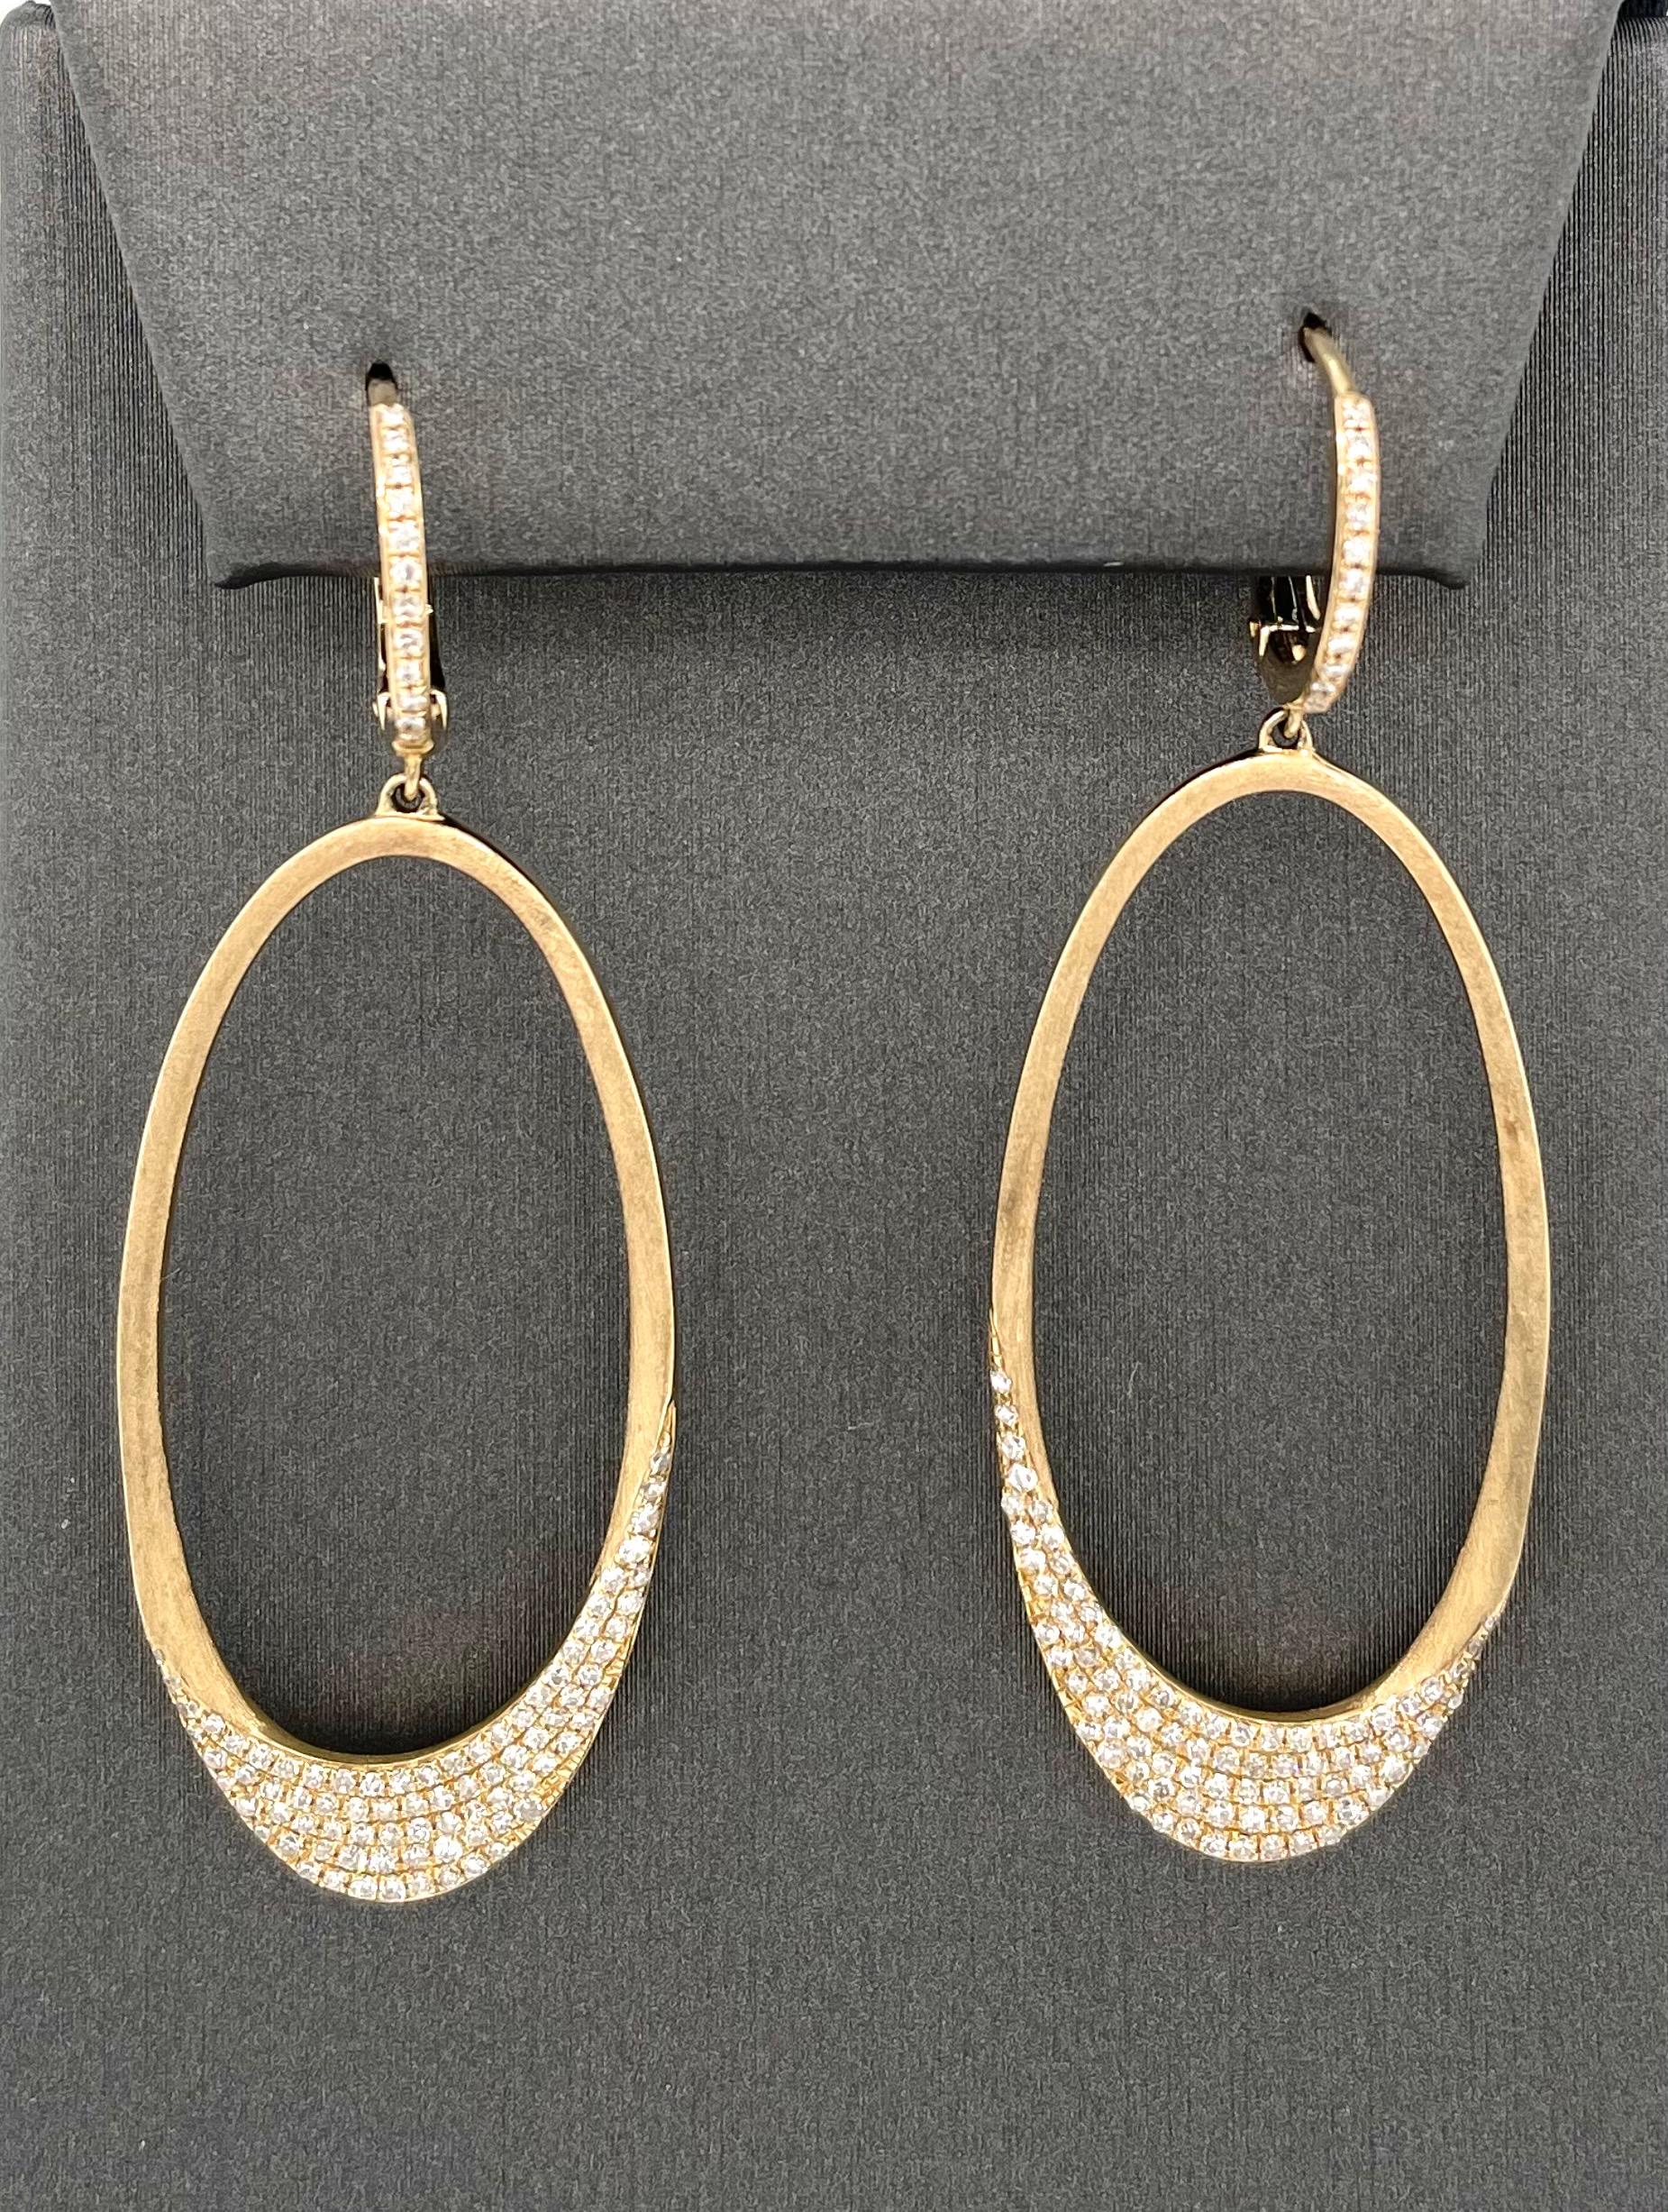 Classic and Modern looking earrings made to be worn daily.  These earrings are comfortable and transition from Day to night.  14K yellow gold and white diamond (.59 carat weight) oval dangle earrings.  A stylish 